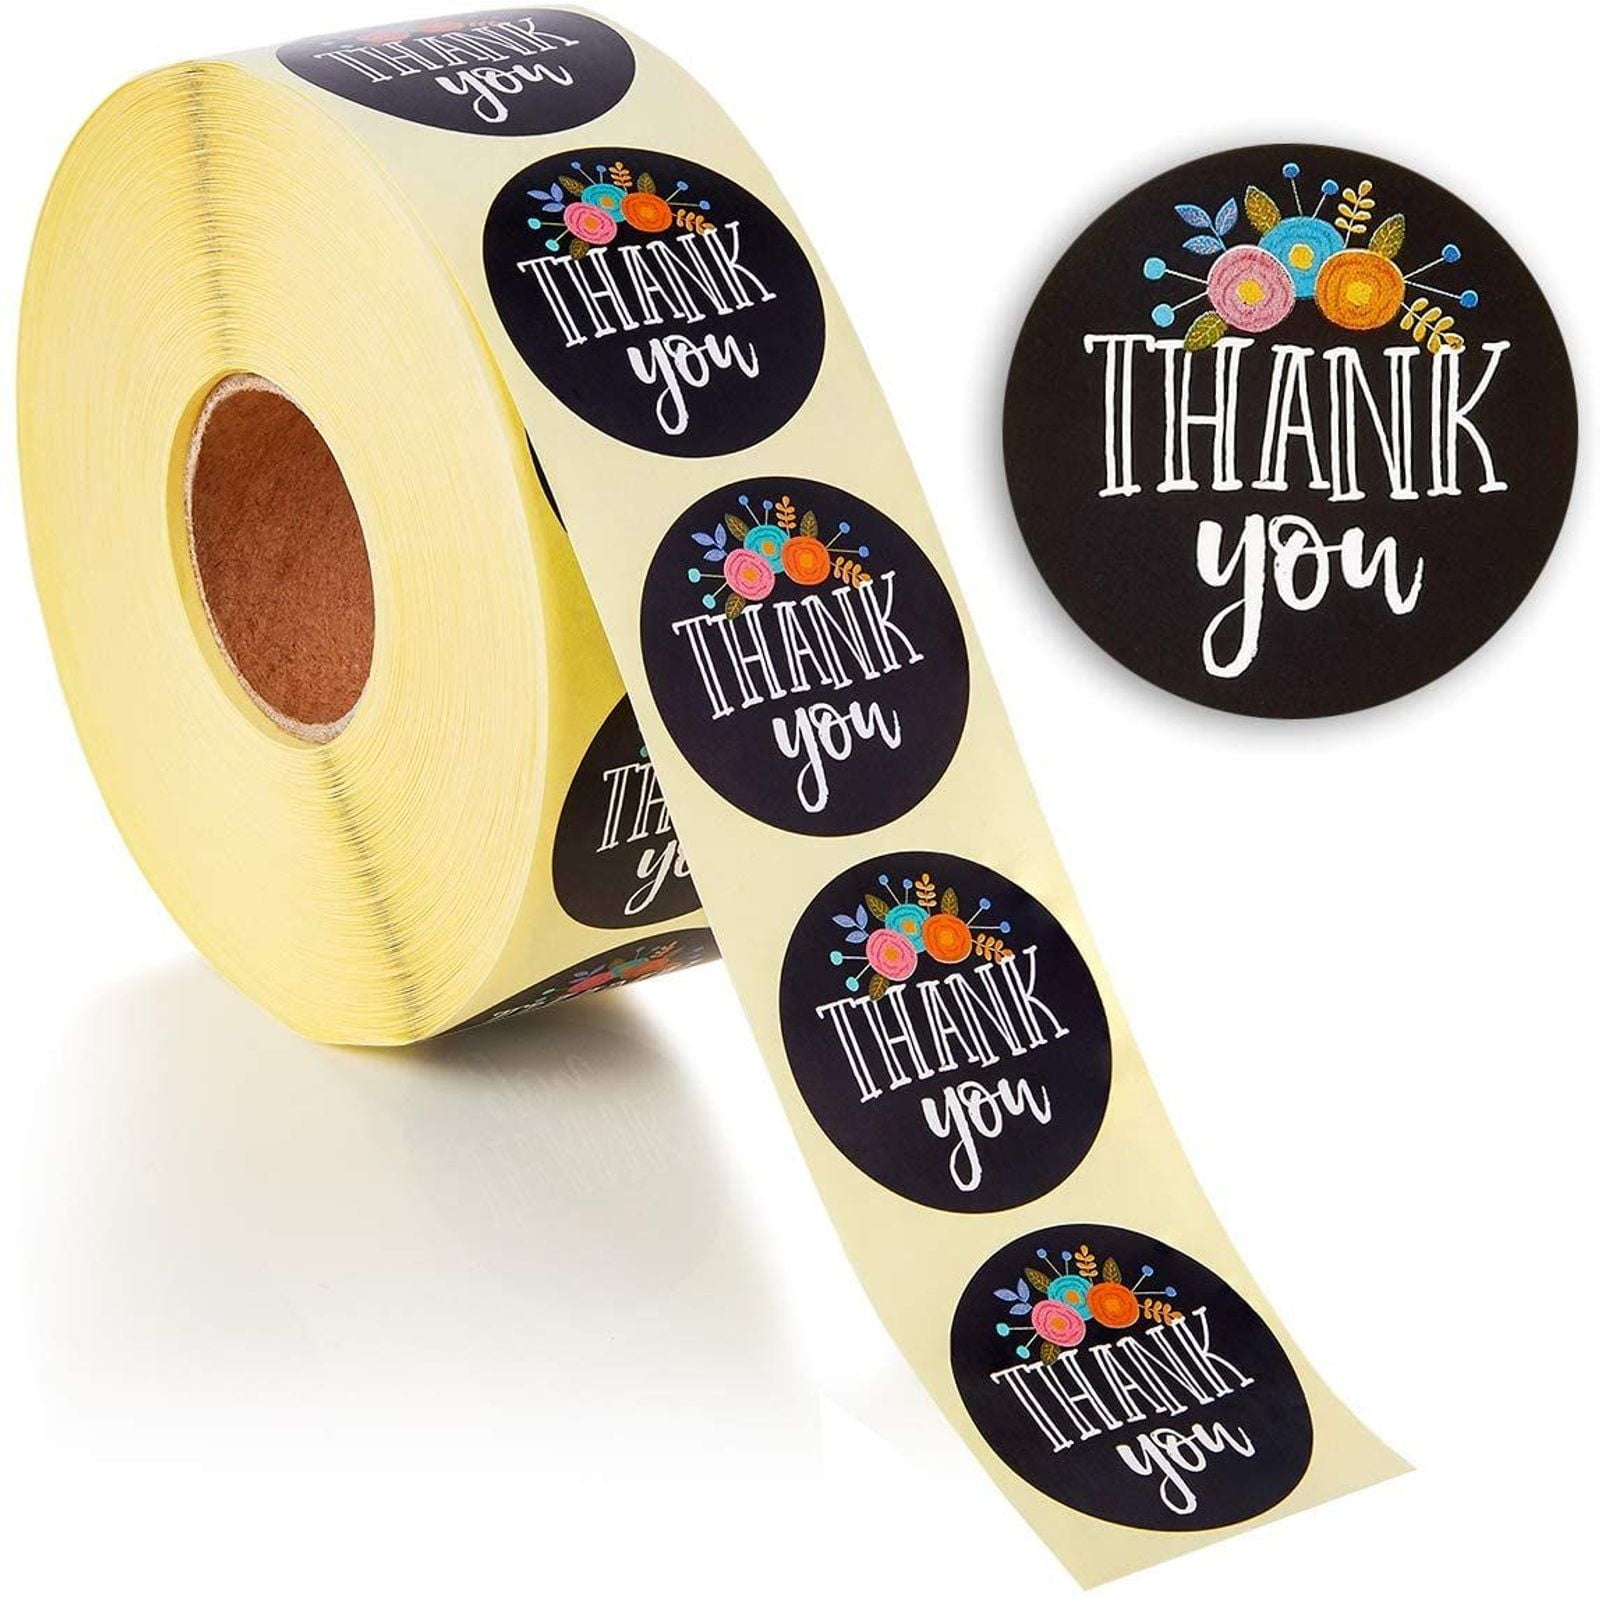 6 Rolls of 1000 1.5" Round Orange PAID Thank You Shipping Labels Stickers 